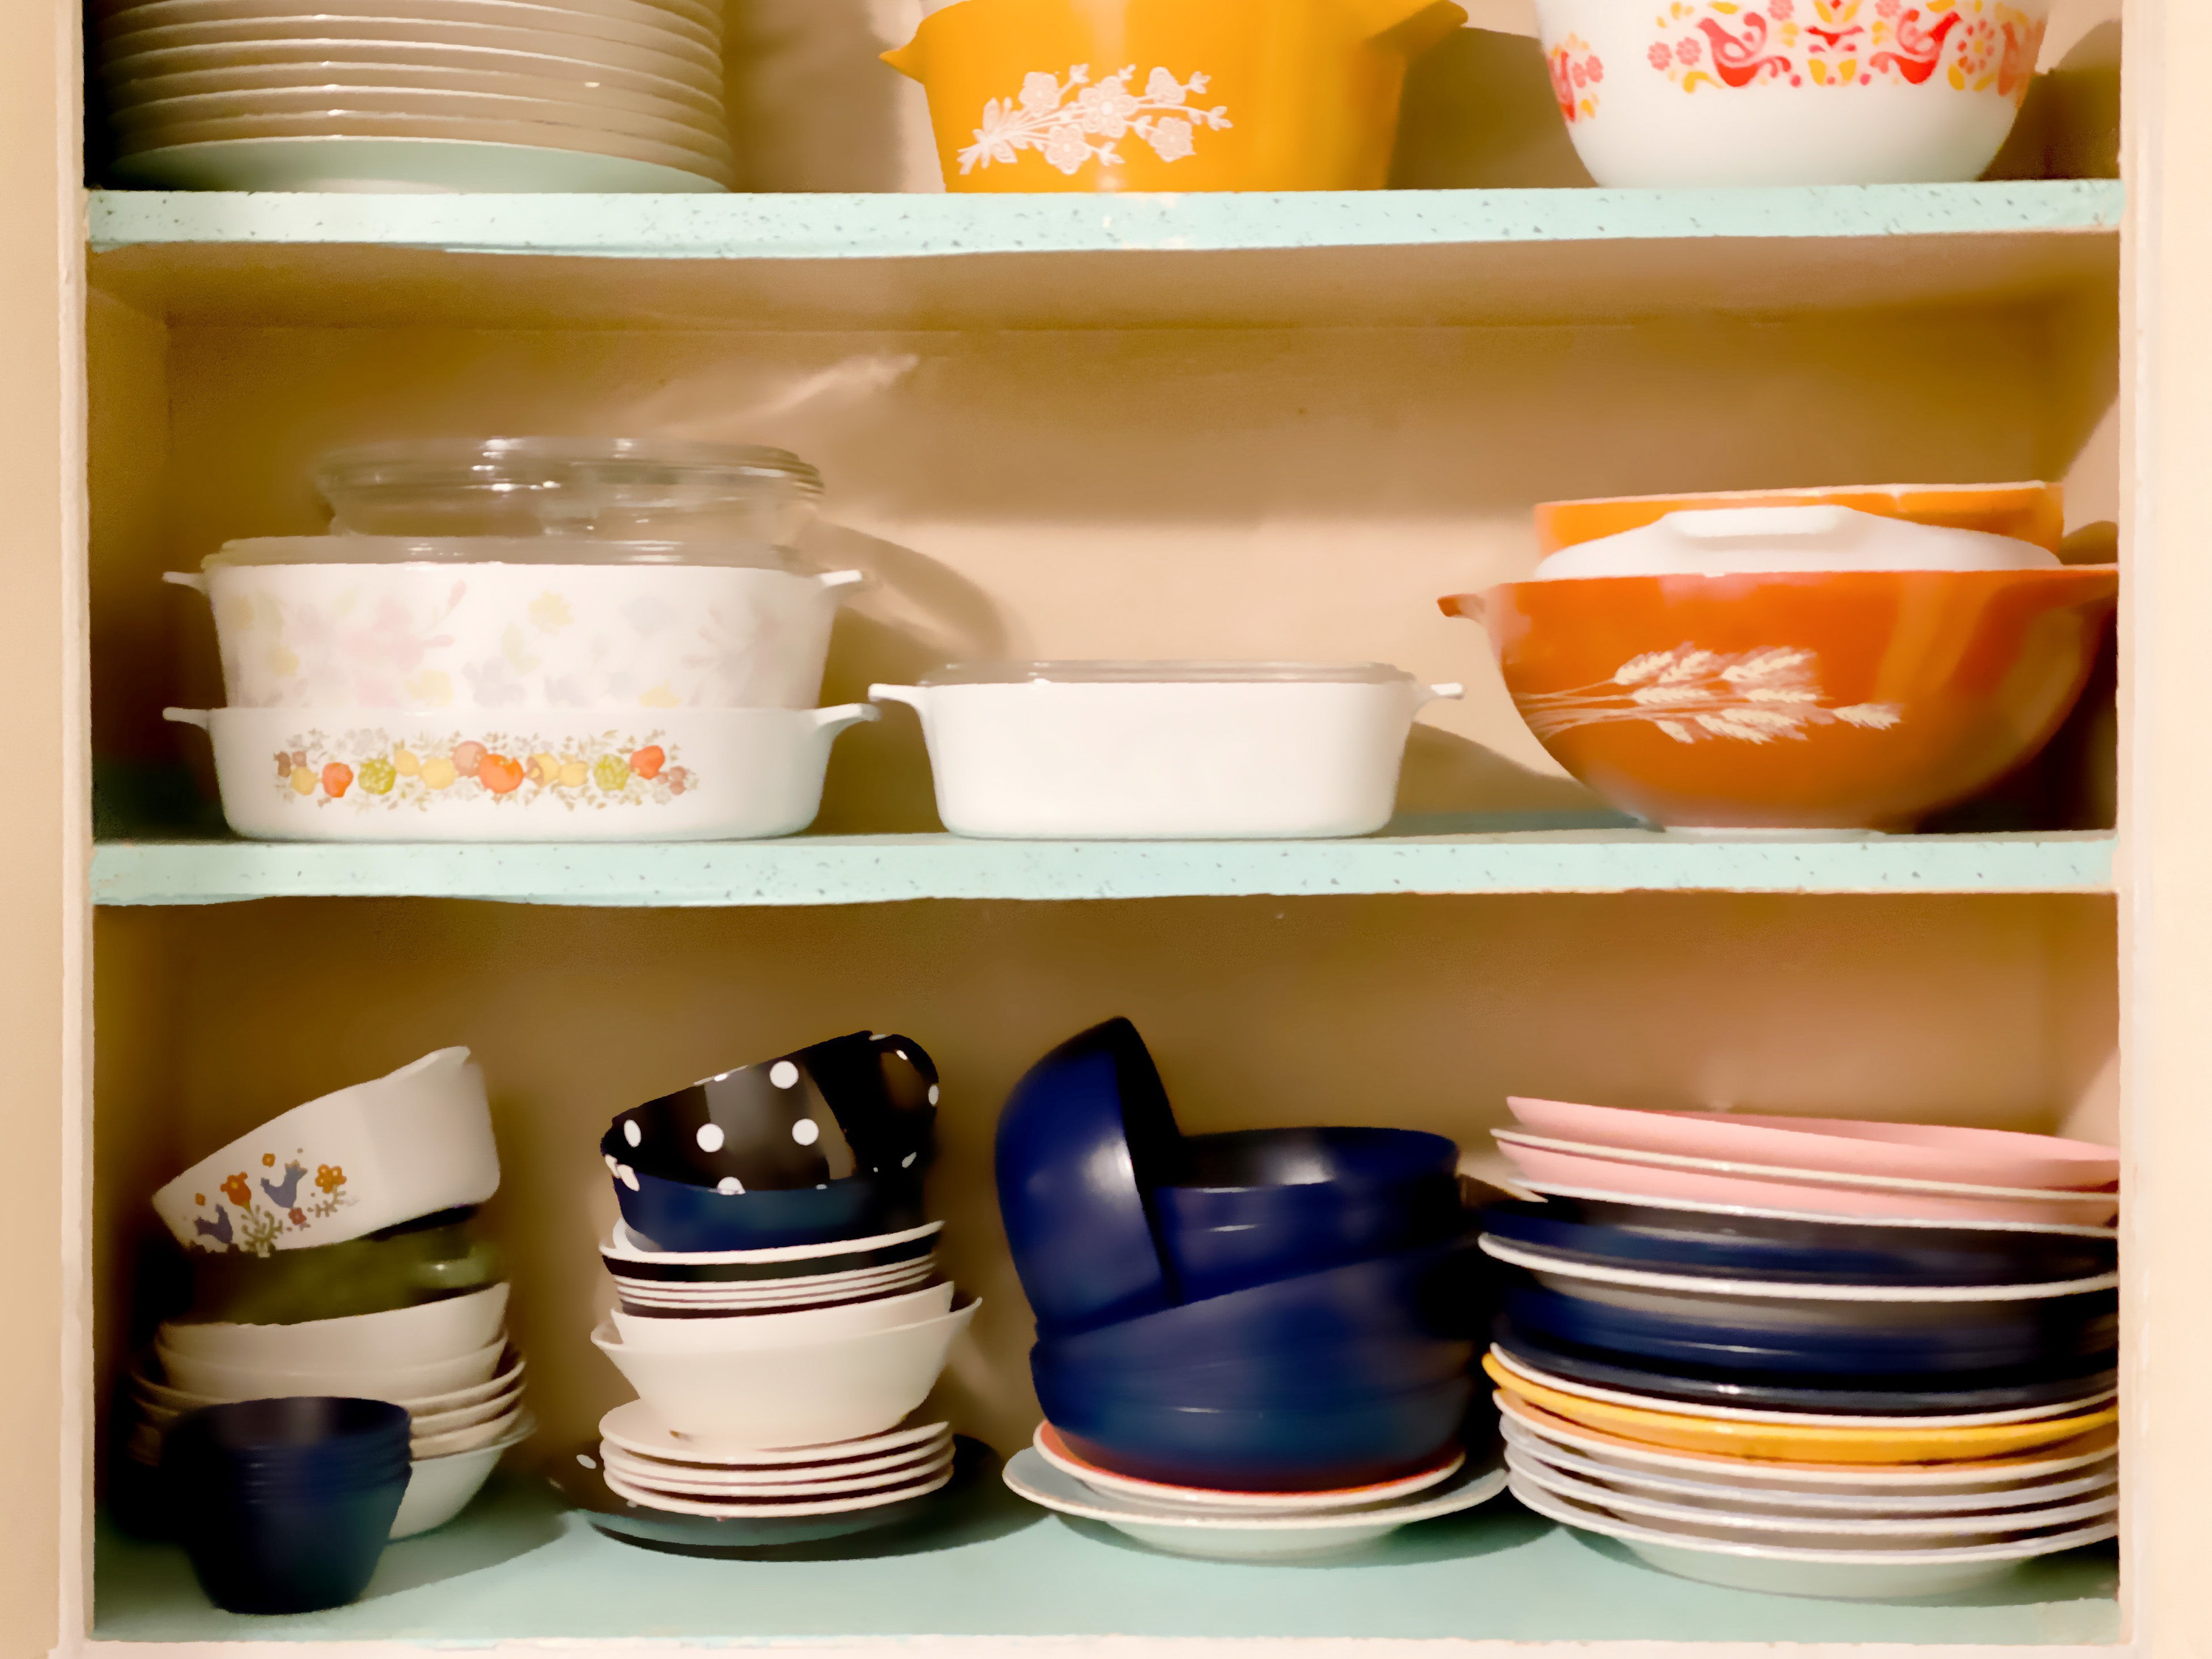 cupboard full of vintage dishes and cookware